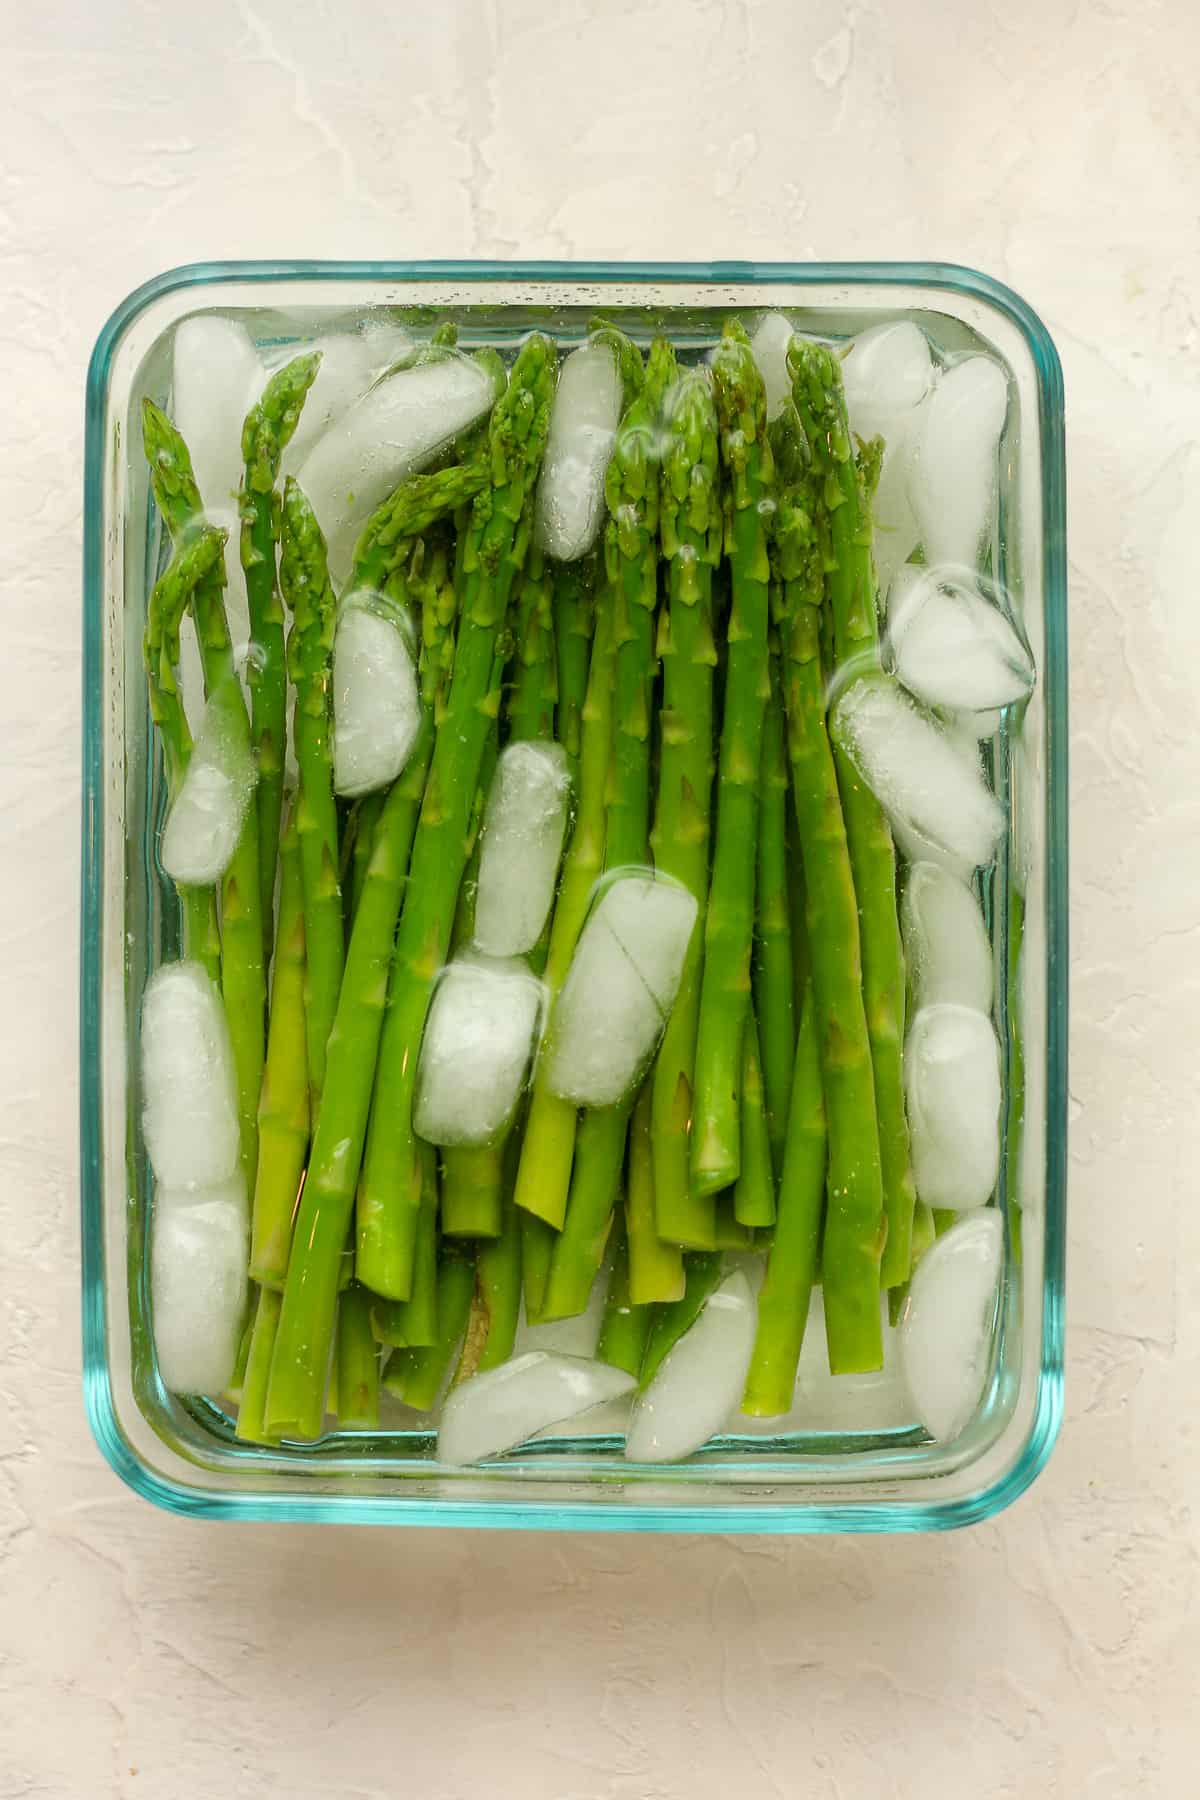 A dish of asparagus with ice water.